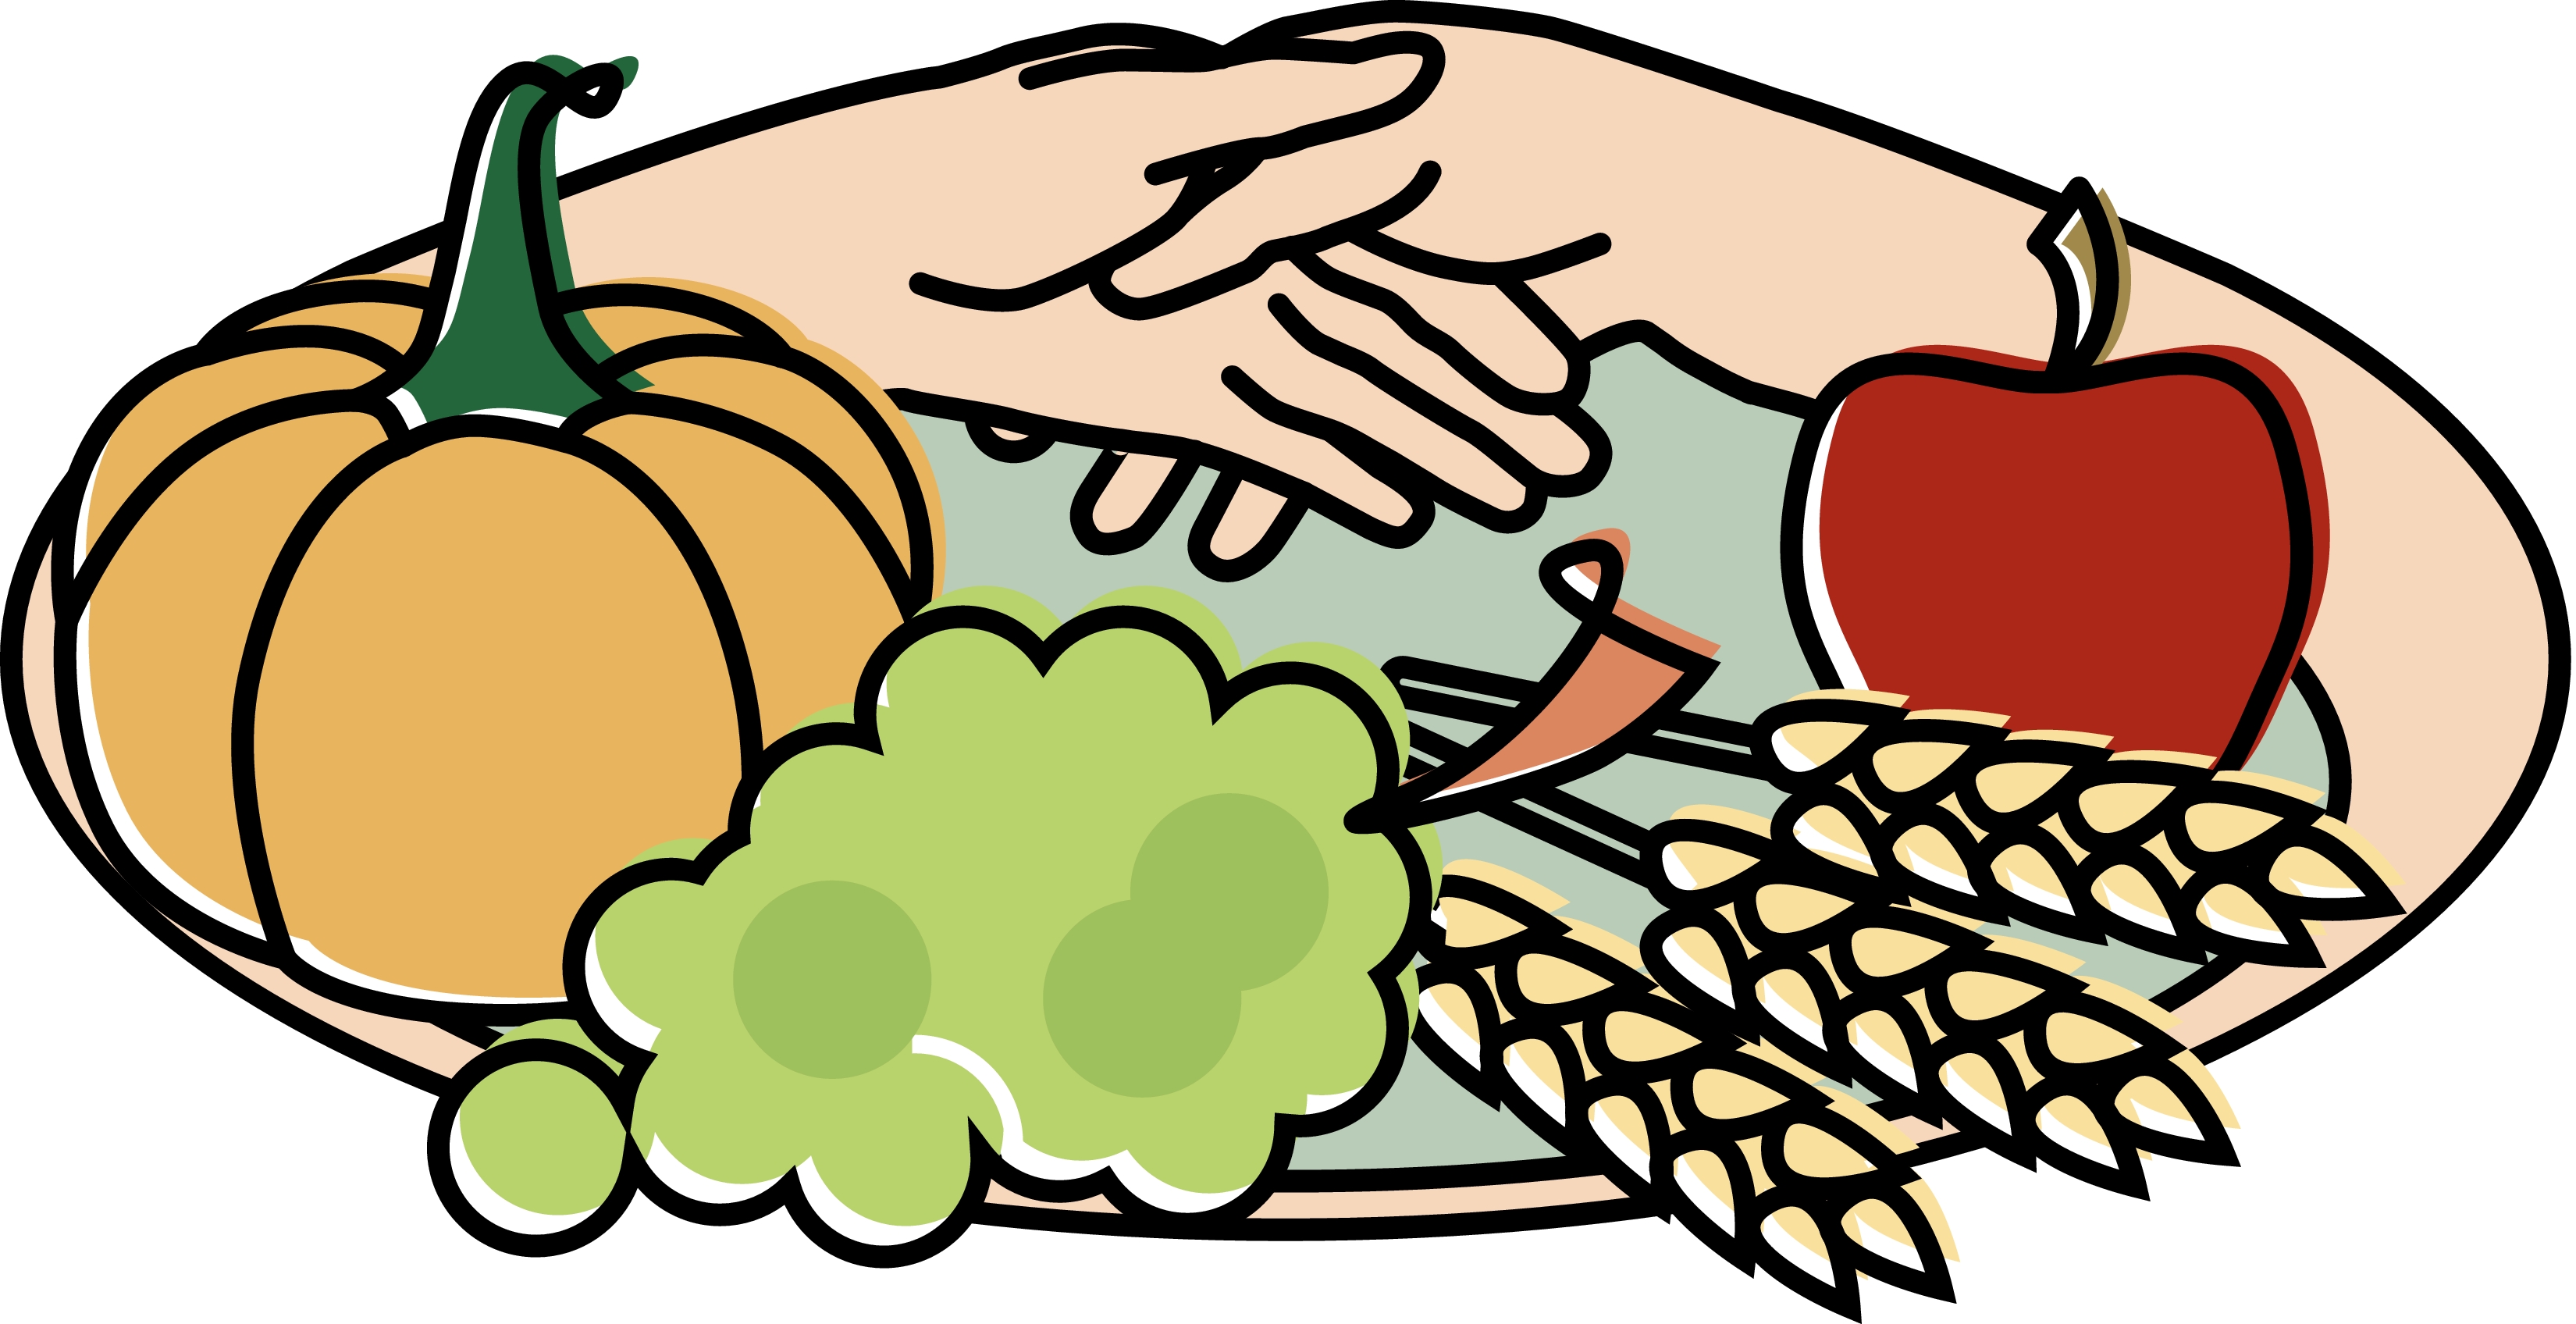 Plate of food clipart